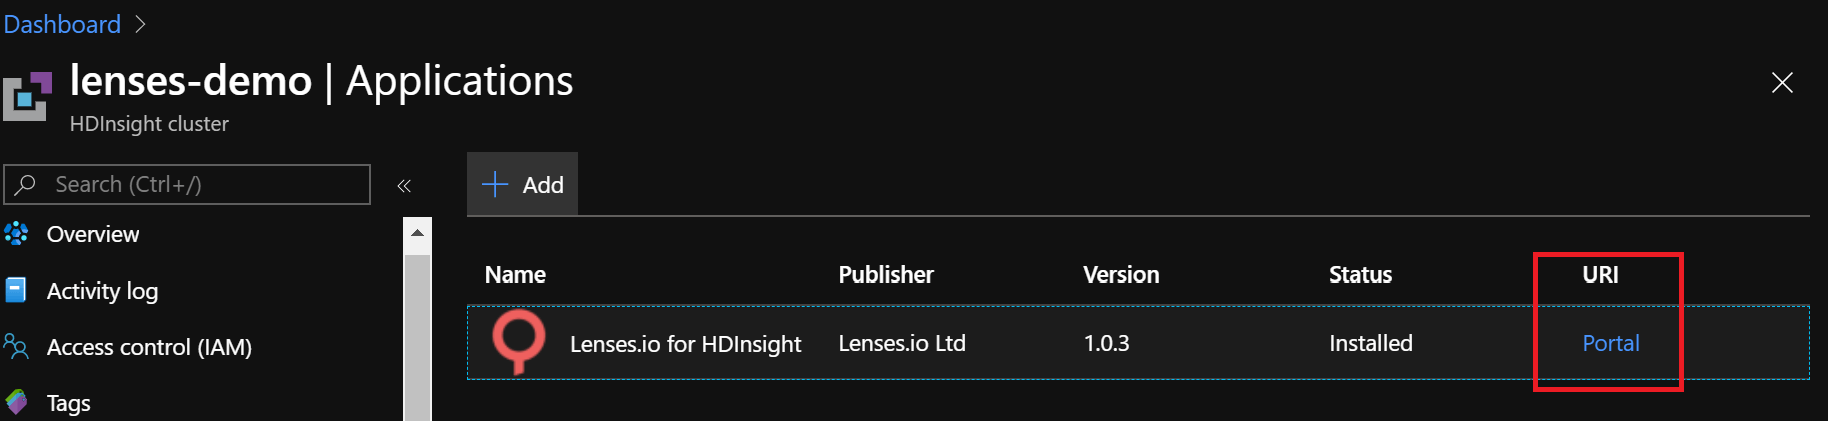 Login to HDInsight with Lenses